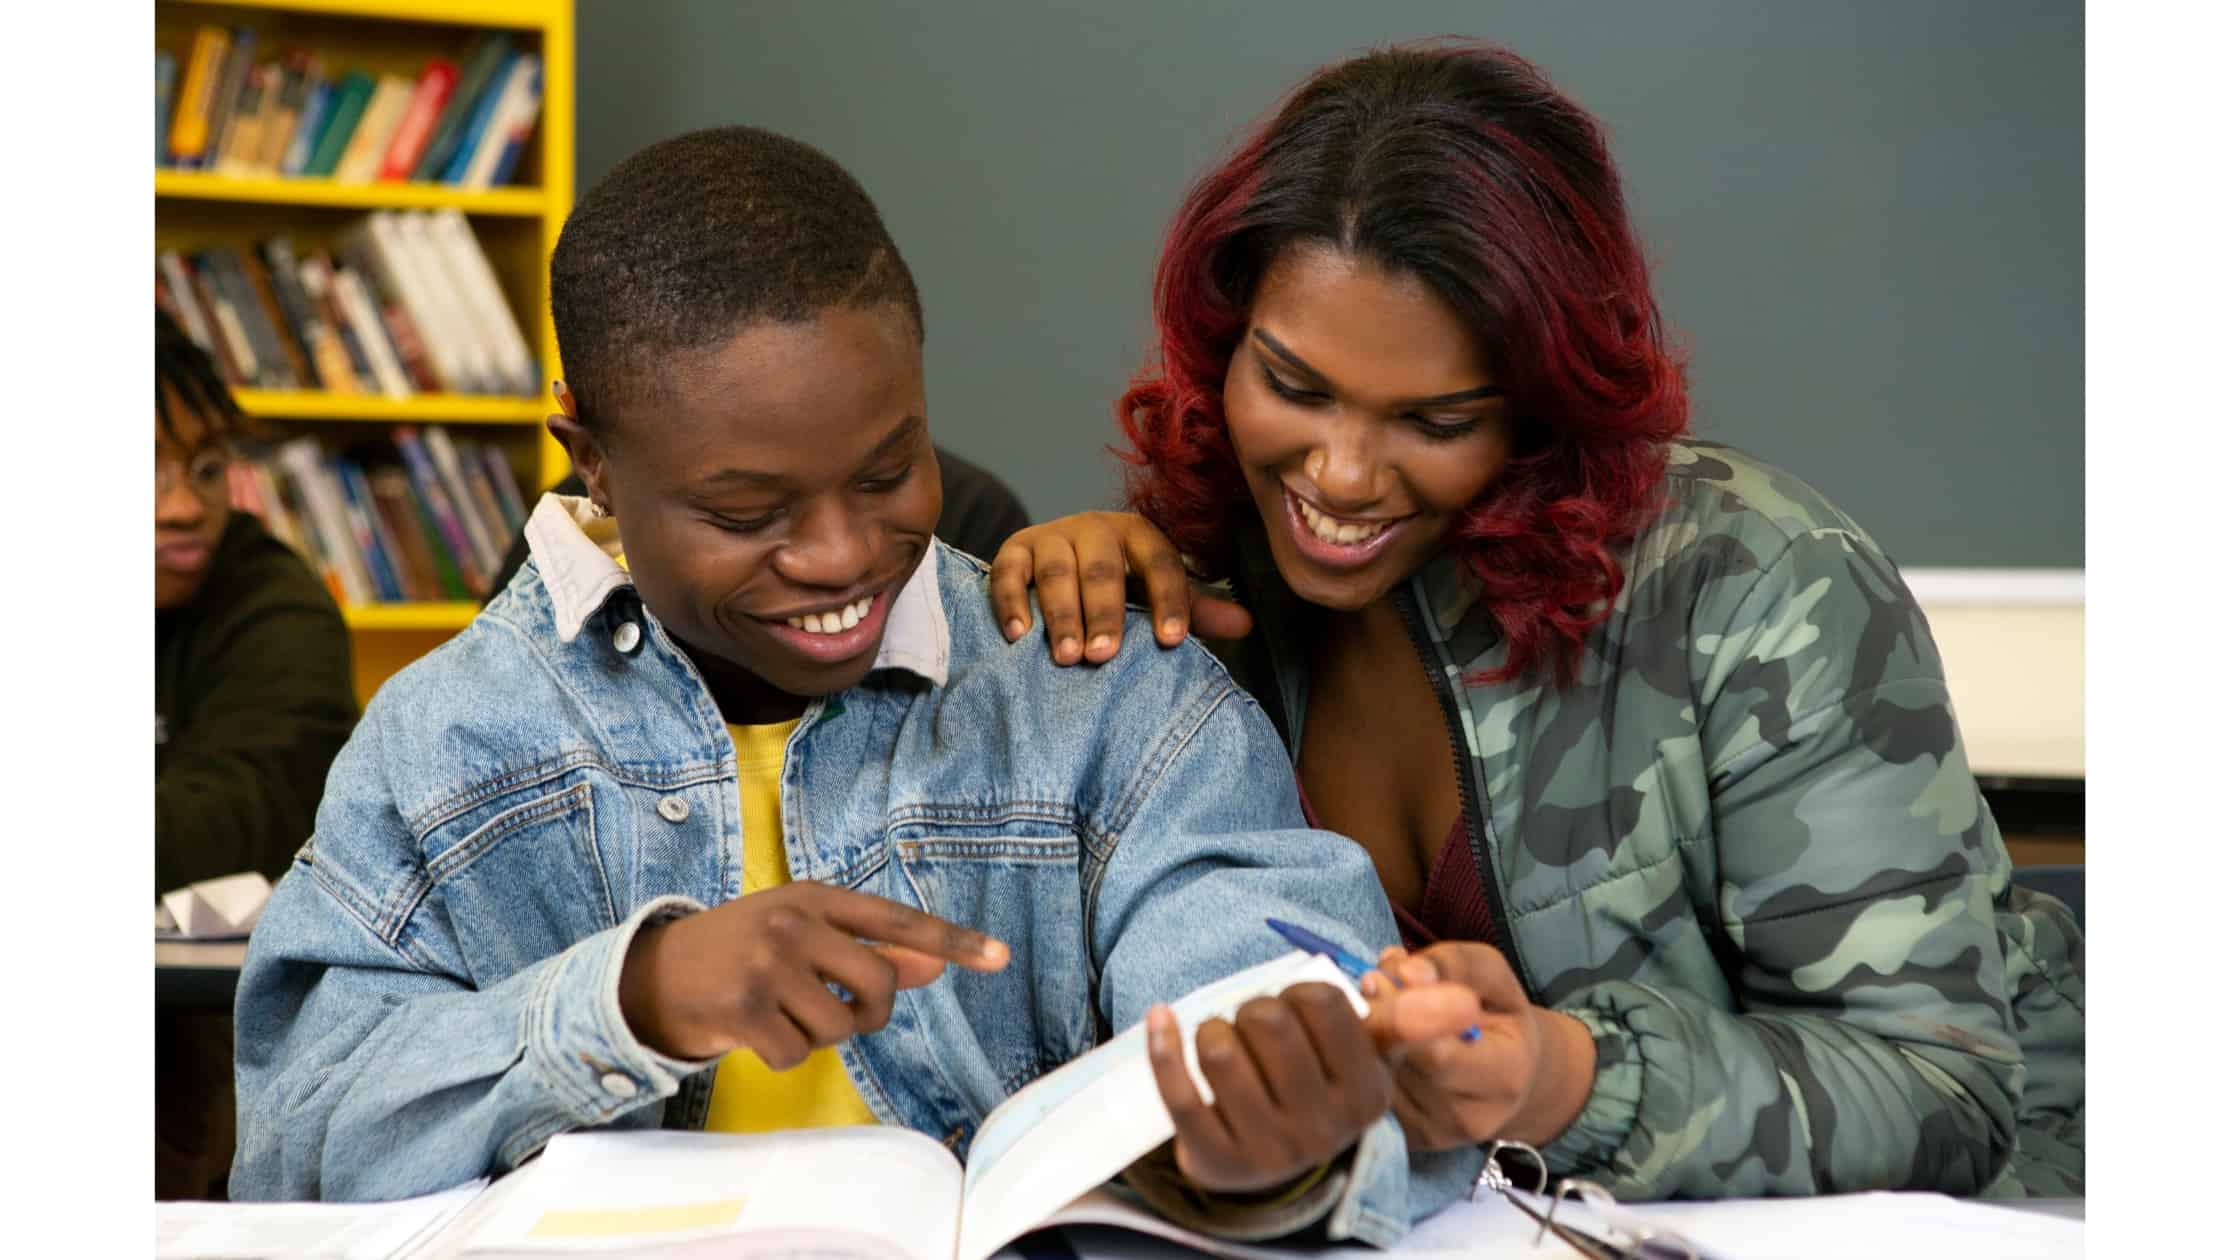 An adult and a young person look at a book together at a desk. They are smiling and another student sits behind them in the classroom.